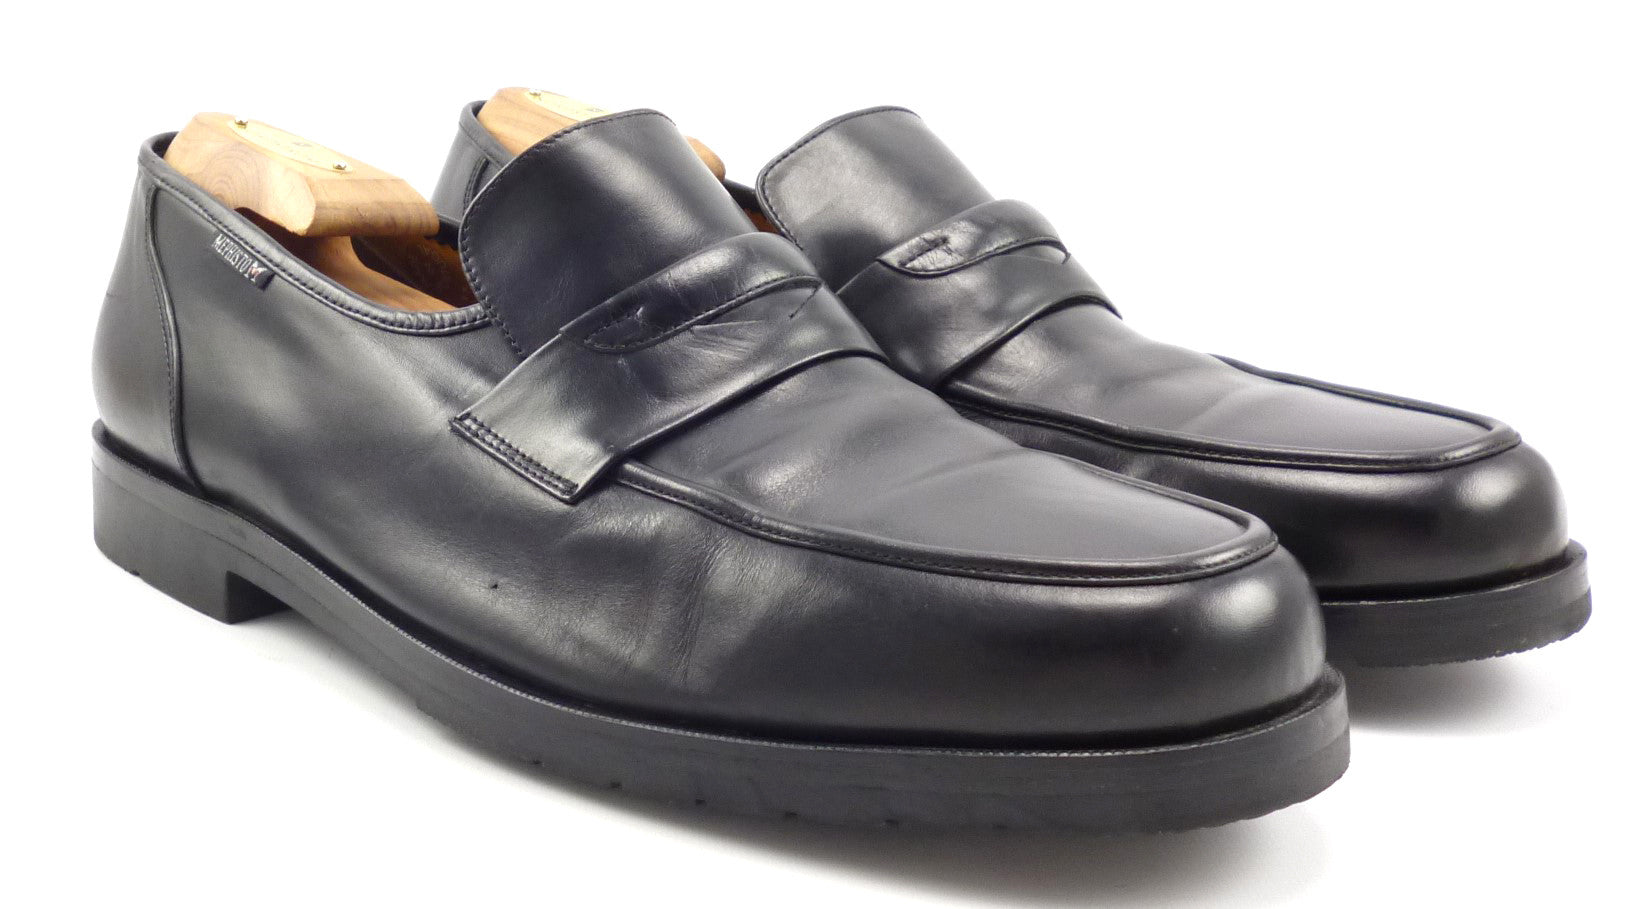 mephisto men's loafers cheap online